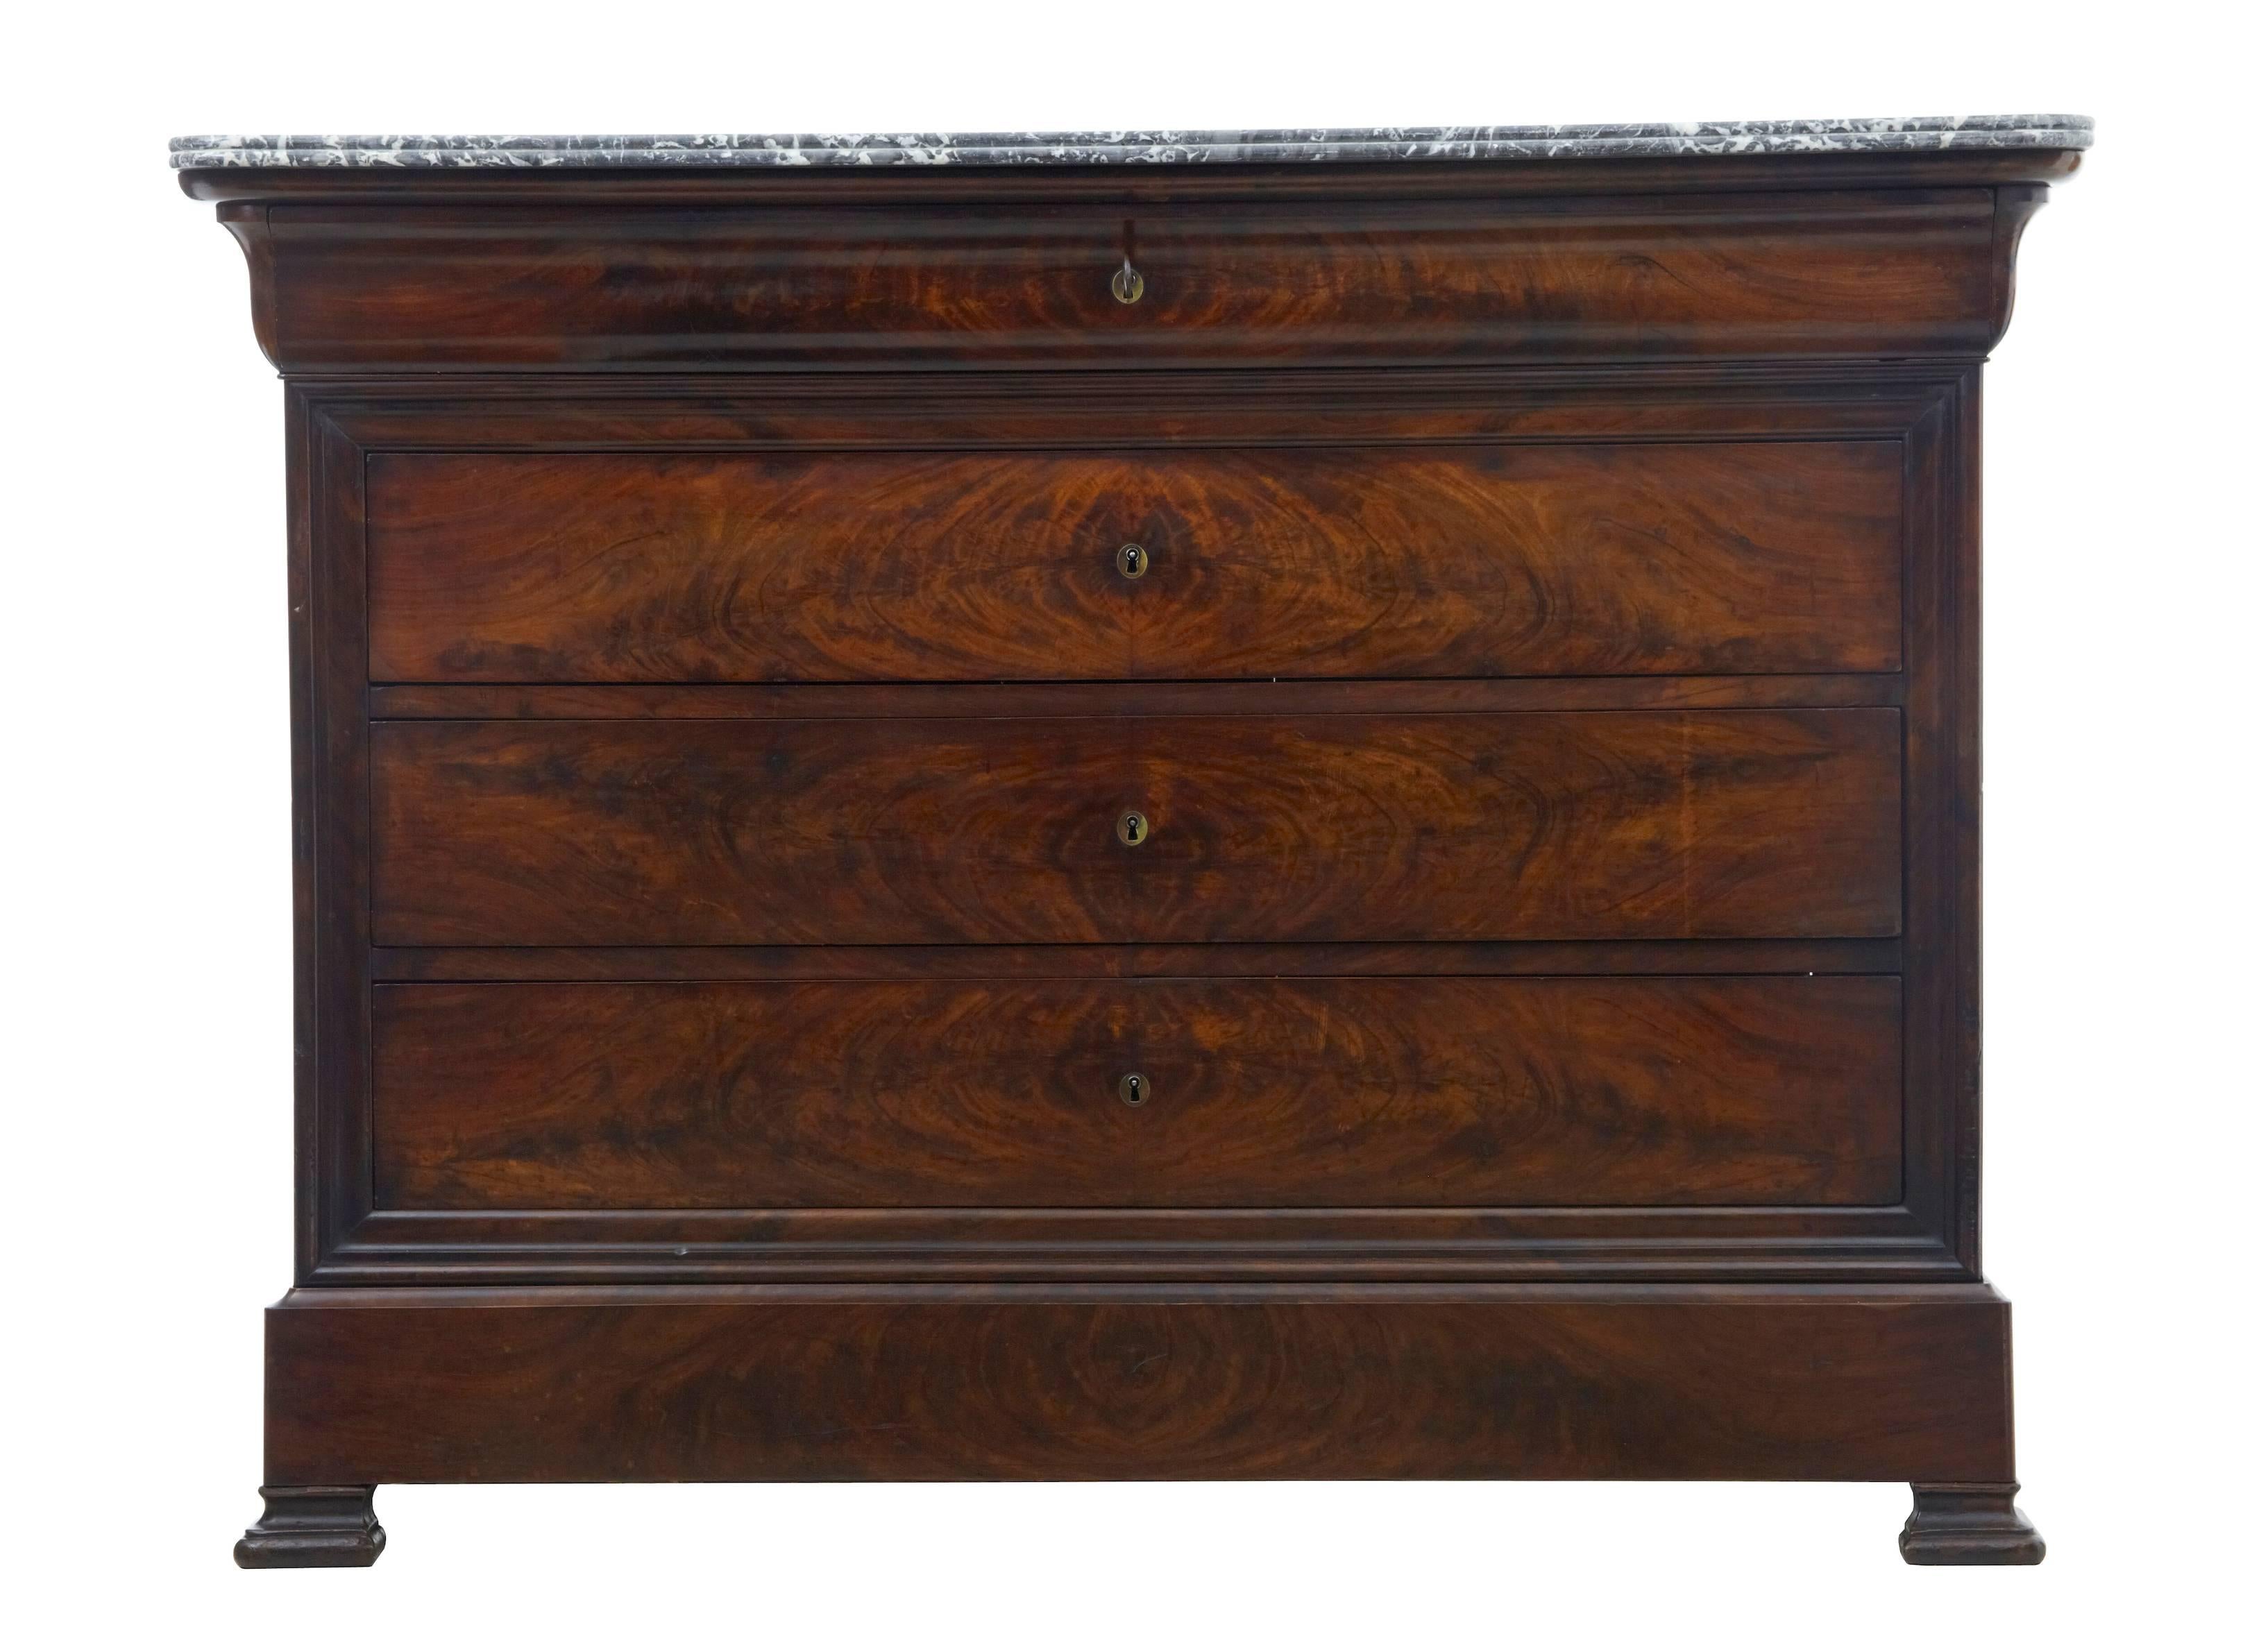 Fine French commode of good quality, circa 1860.
Excellent color and patina.
Five drawers, one of which is enclosed in the plinth.
Original marble top, which does have some minor losses to the back edge.
Drawers open on the key.

Measures: